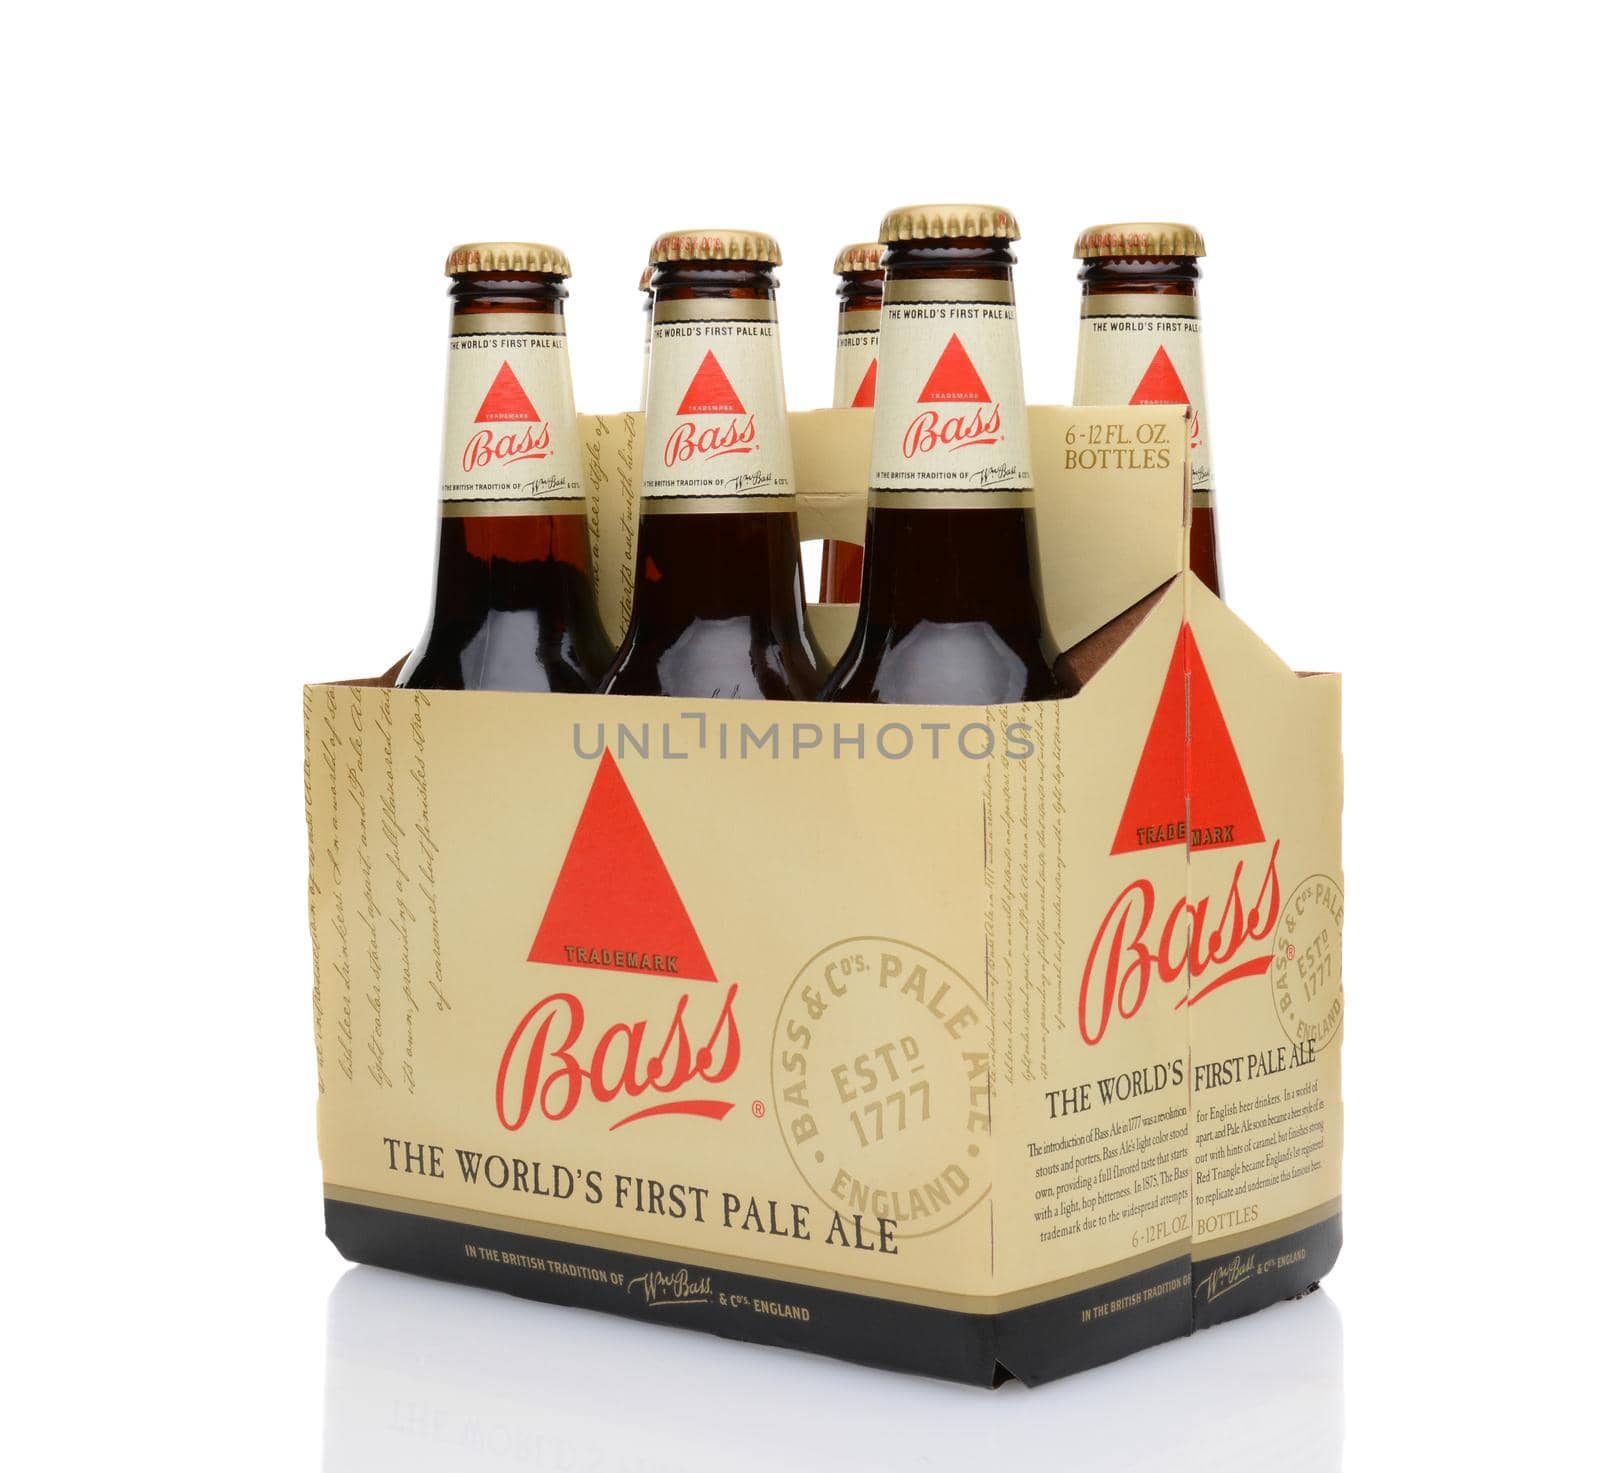 IRVINE, CA - MAY 25, 2014: A 6 pack of Bass Ale, 3/4 view. The Bass Brewery was founded in 1777 by William Bass, in Trent, England is now owned by Anheuser-Busch InBev.